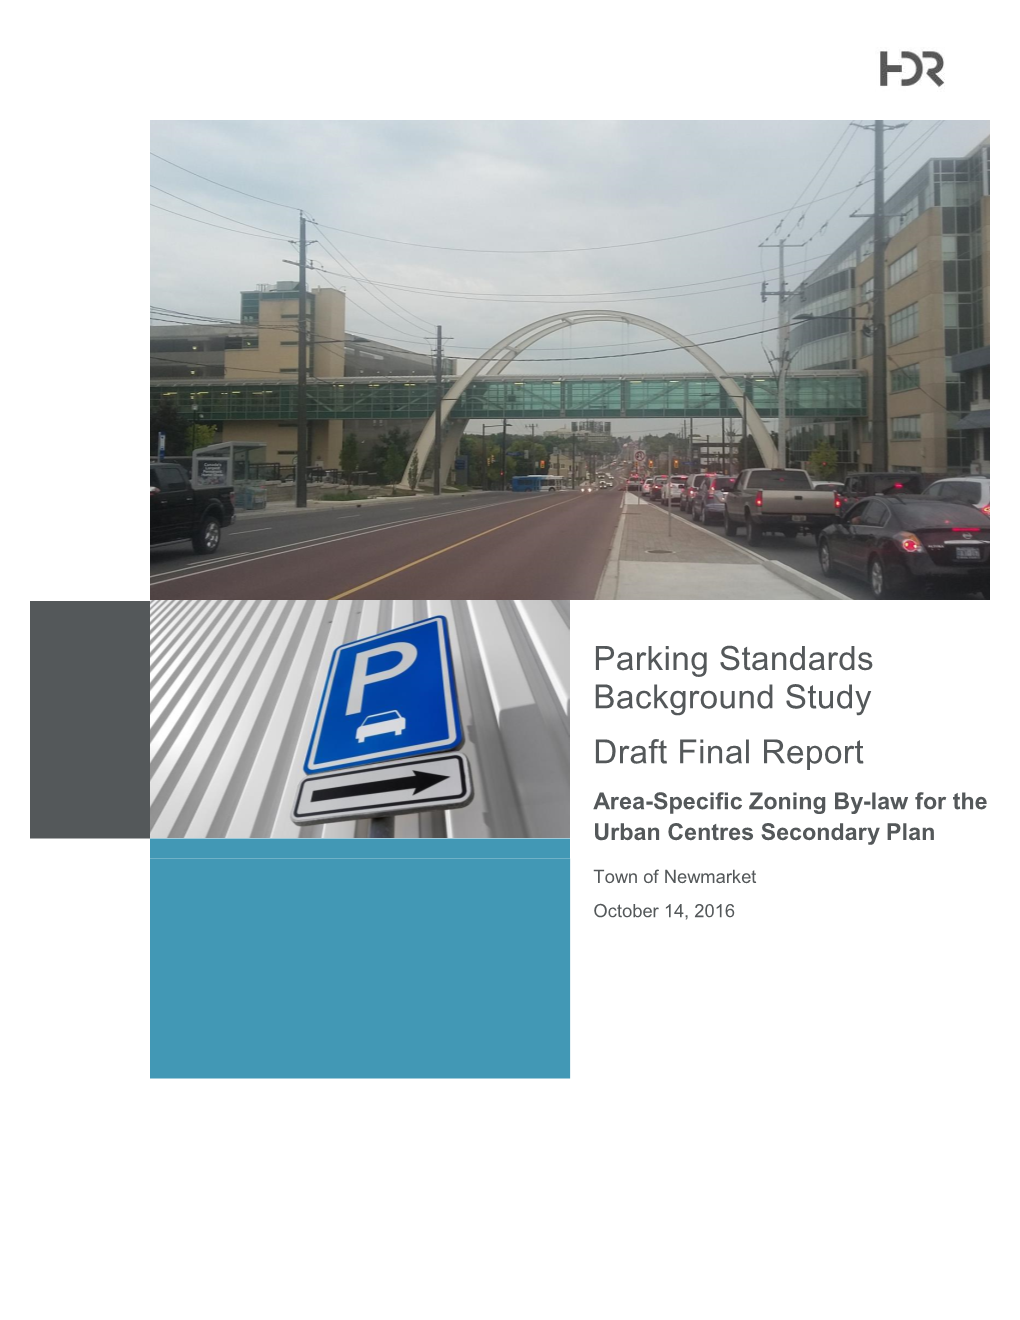 Parking Standards Background Study Draft Final Report Area-Specific Zoning By-Law for the Urban Centres Secondary Plan